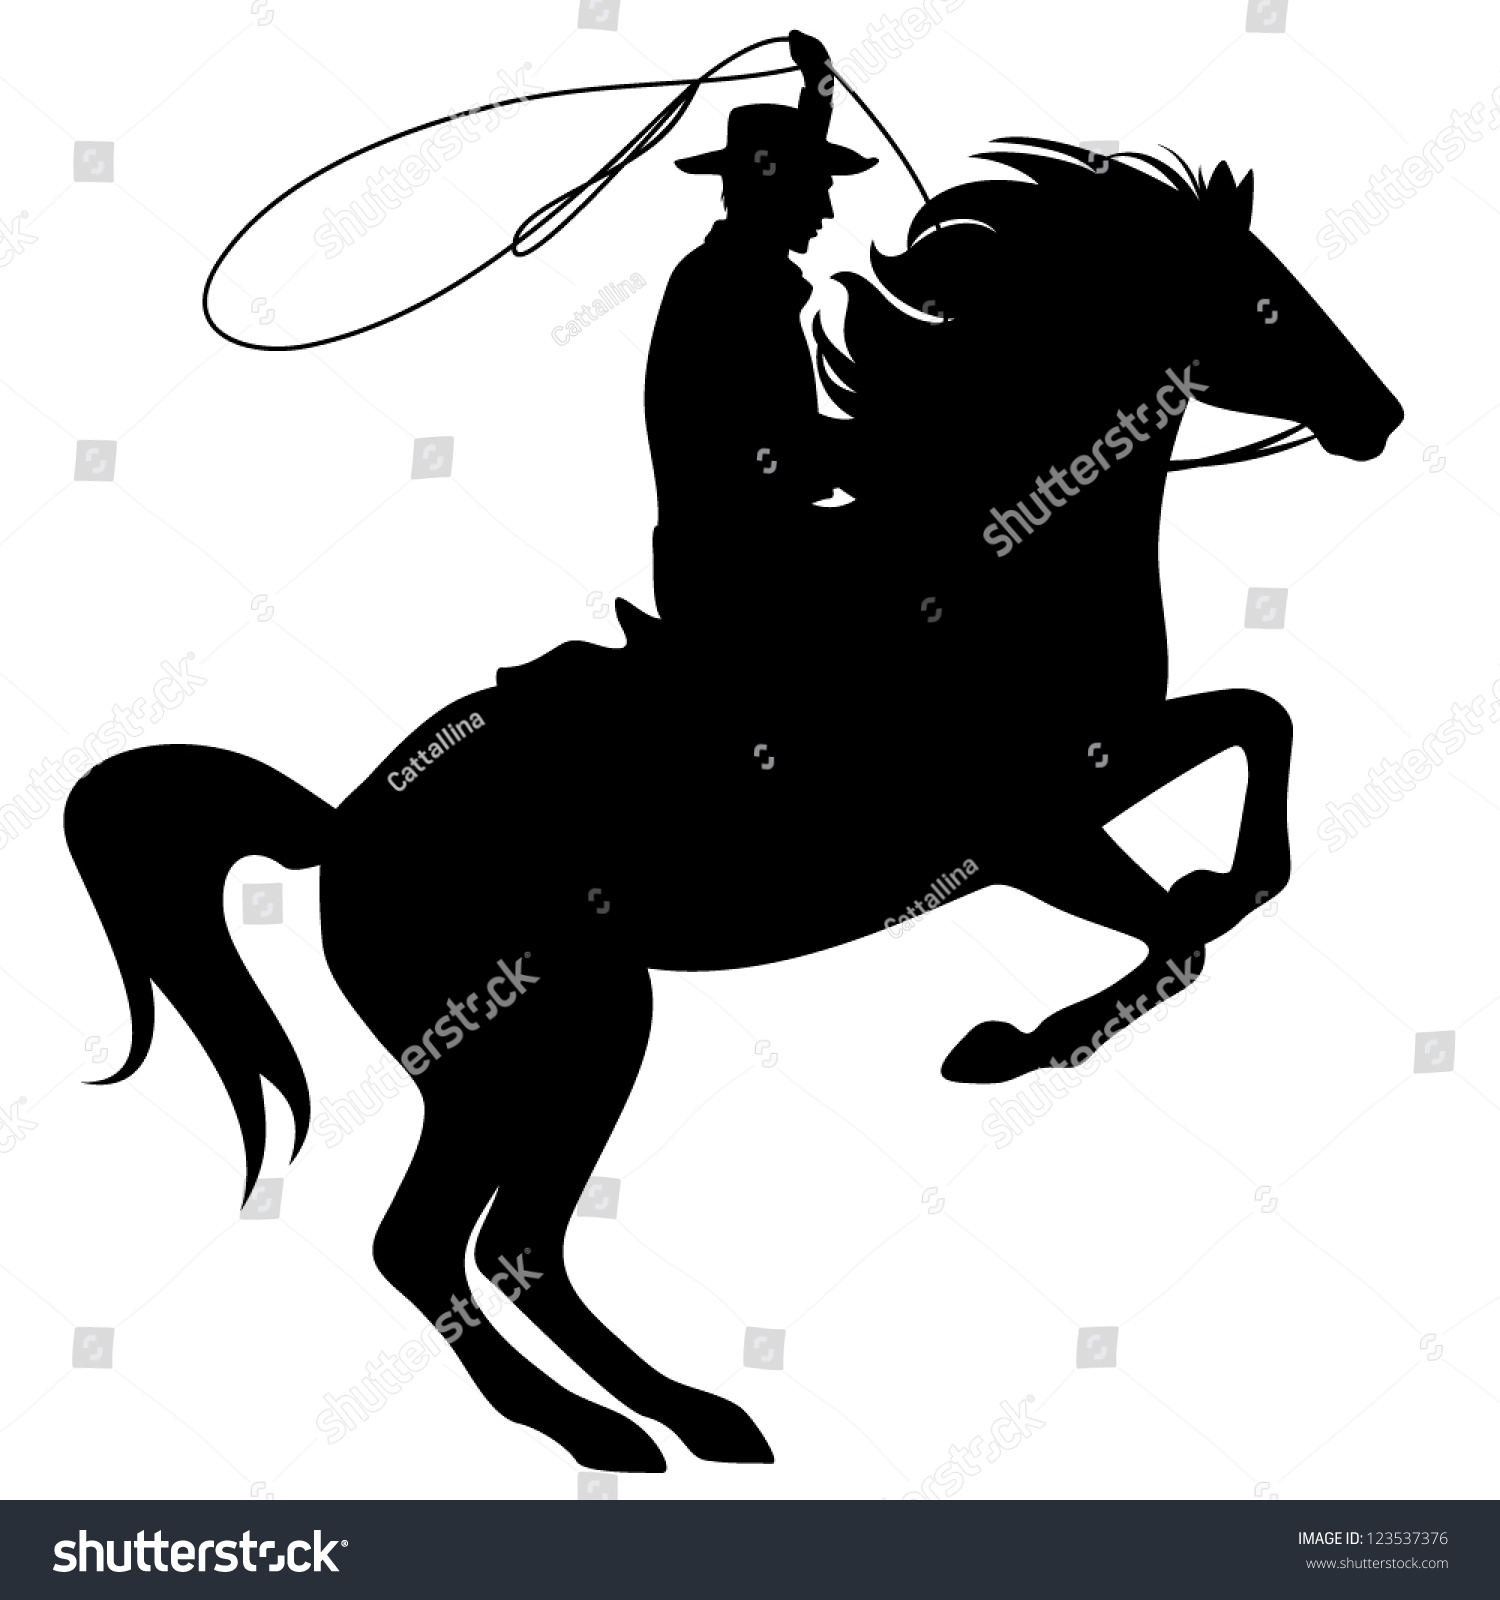 SVG of cowboy throwing lasso riding rearing up horse - black silhouette over white svg